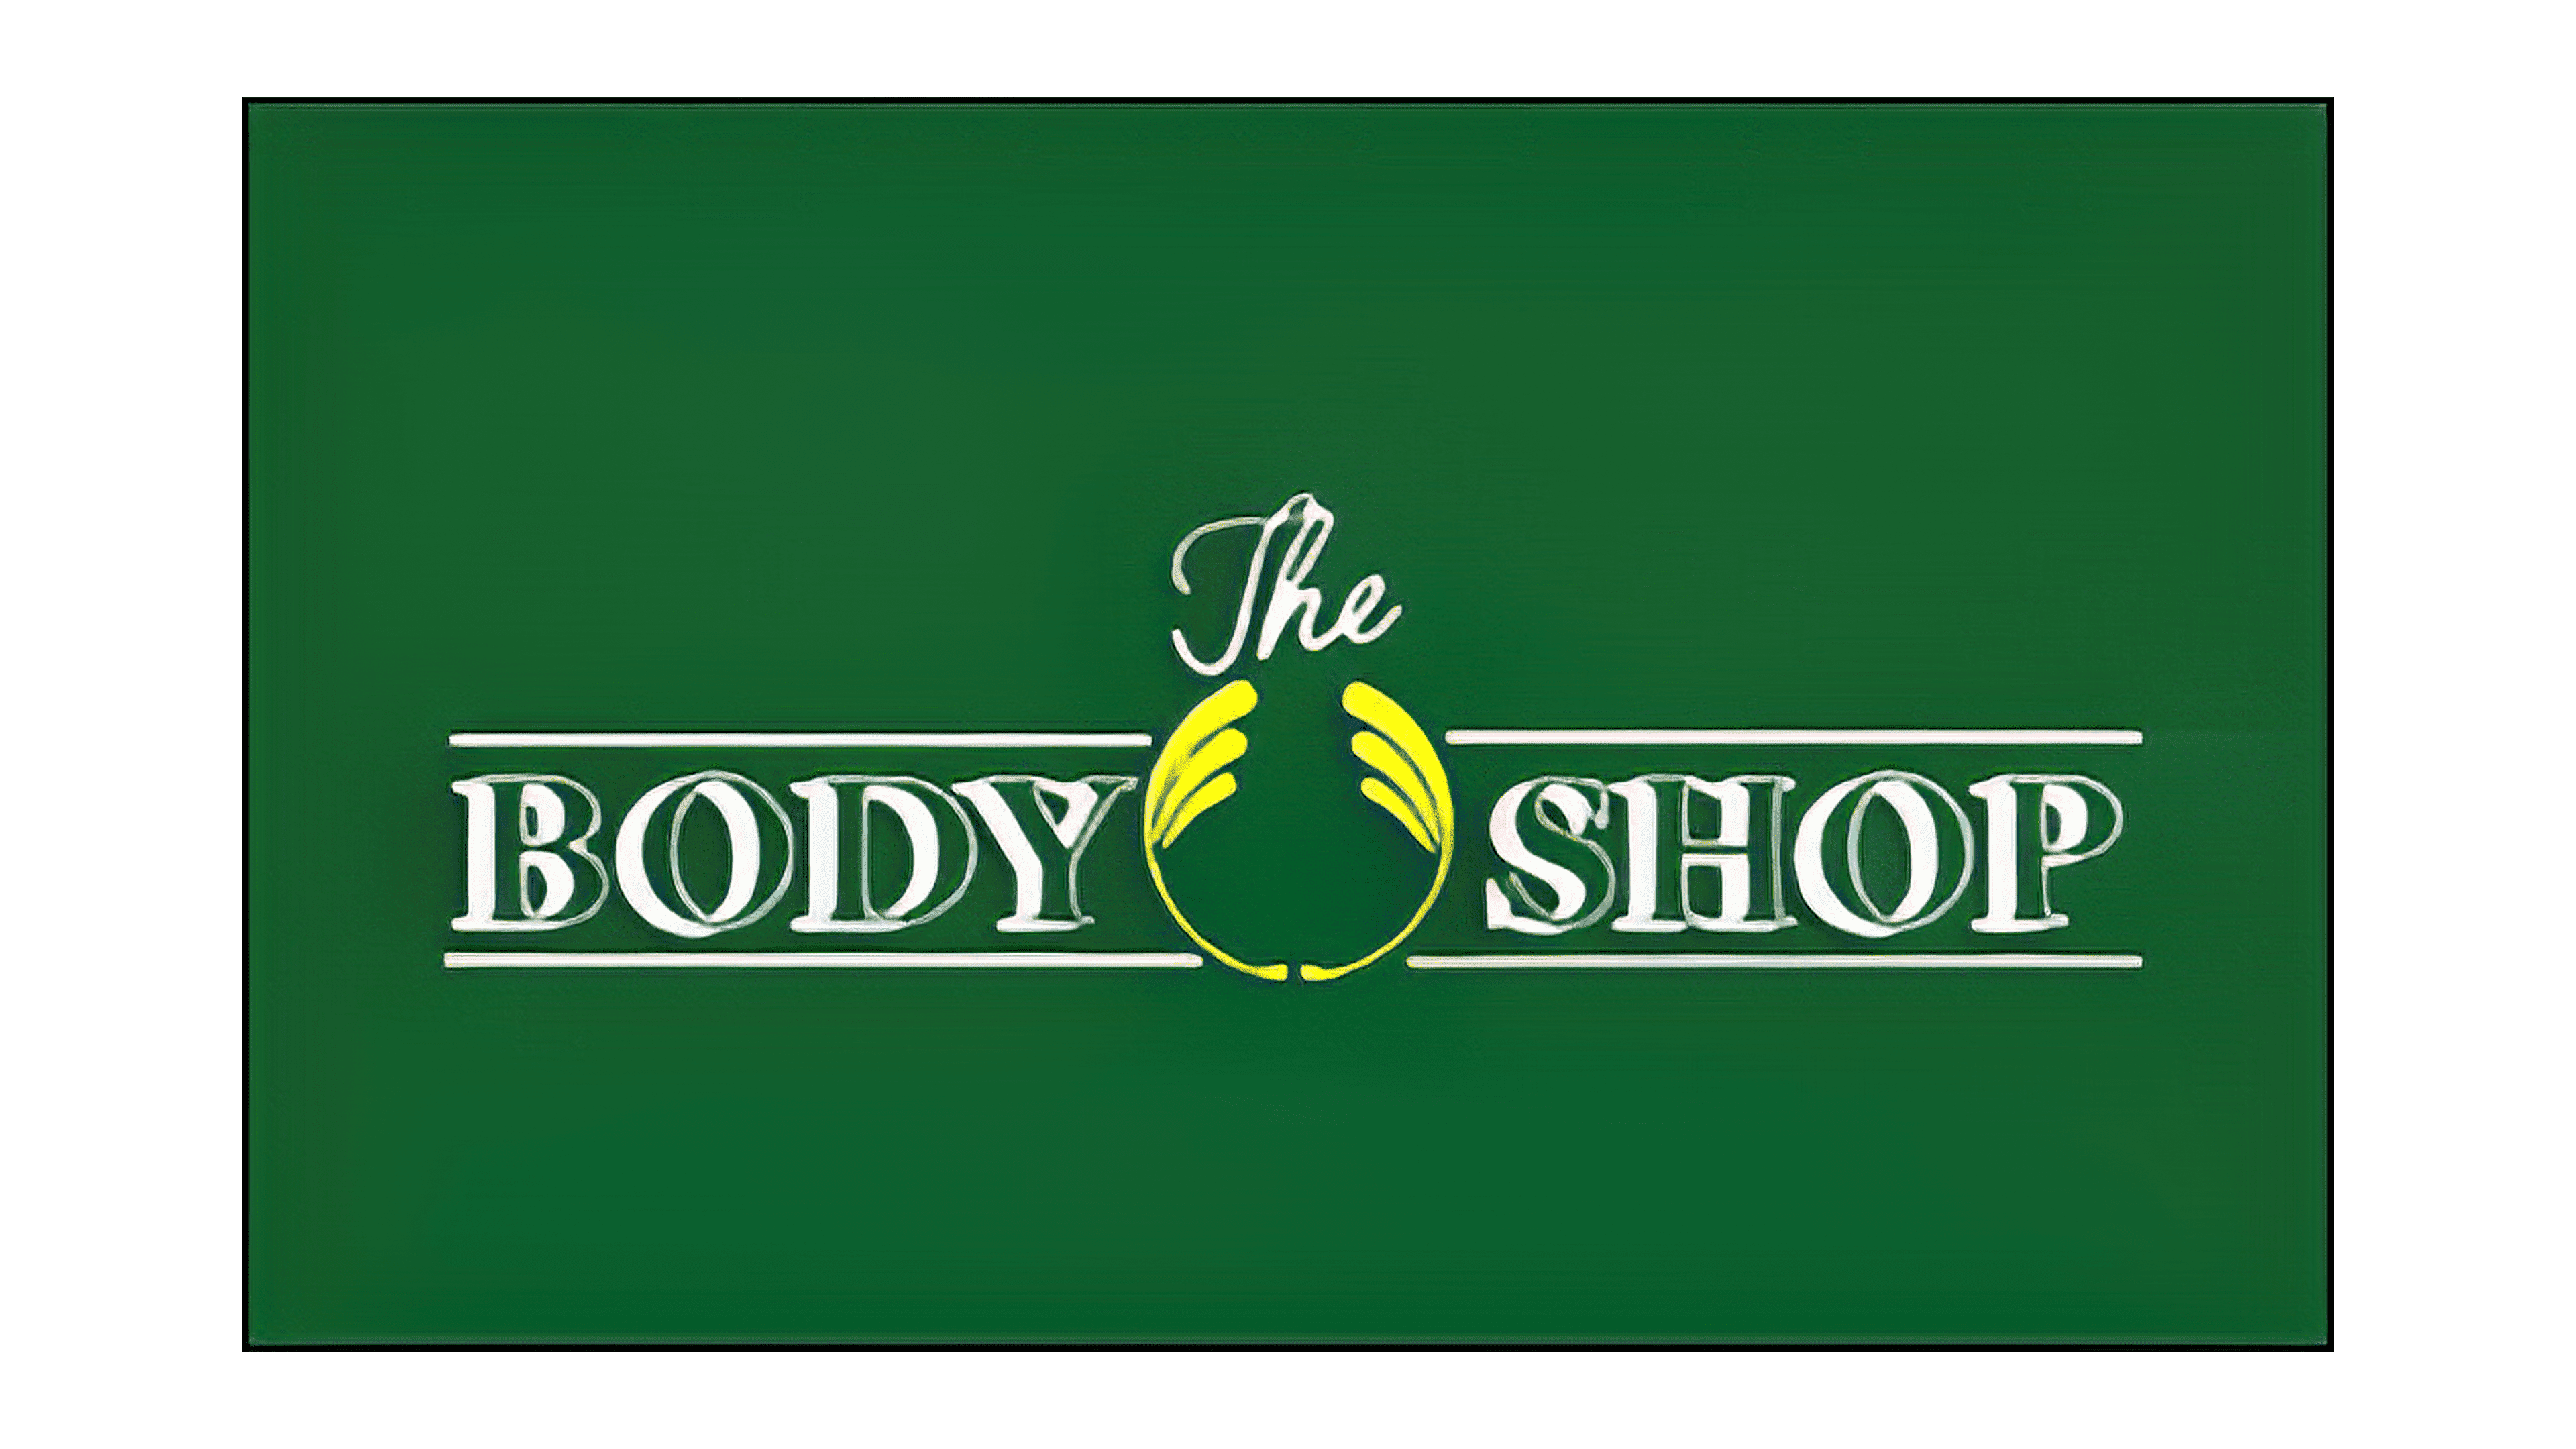 The Body Shop Logo The Most Famous Brands And Company Logos In The World